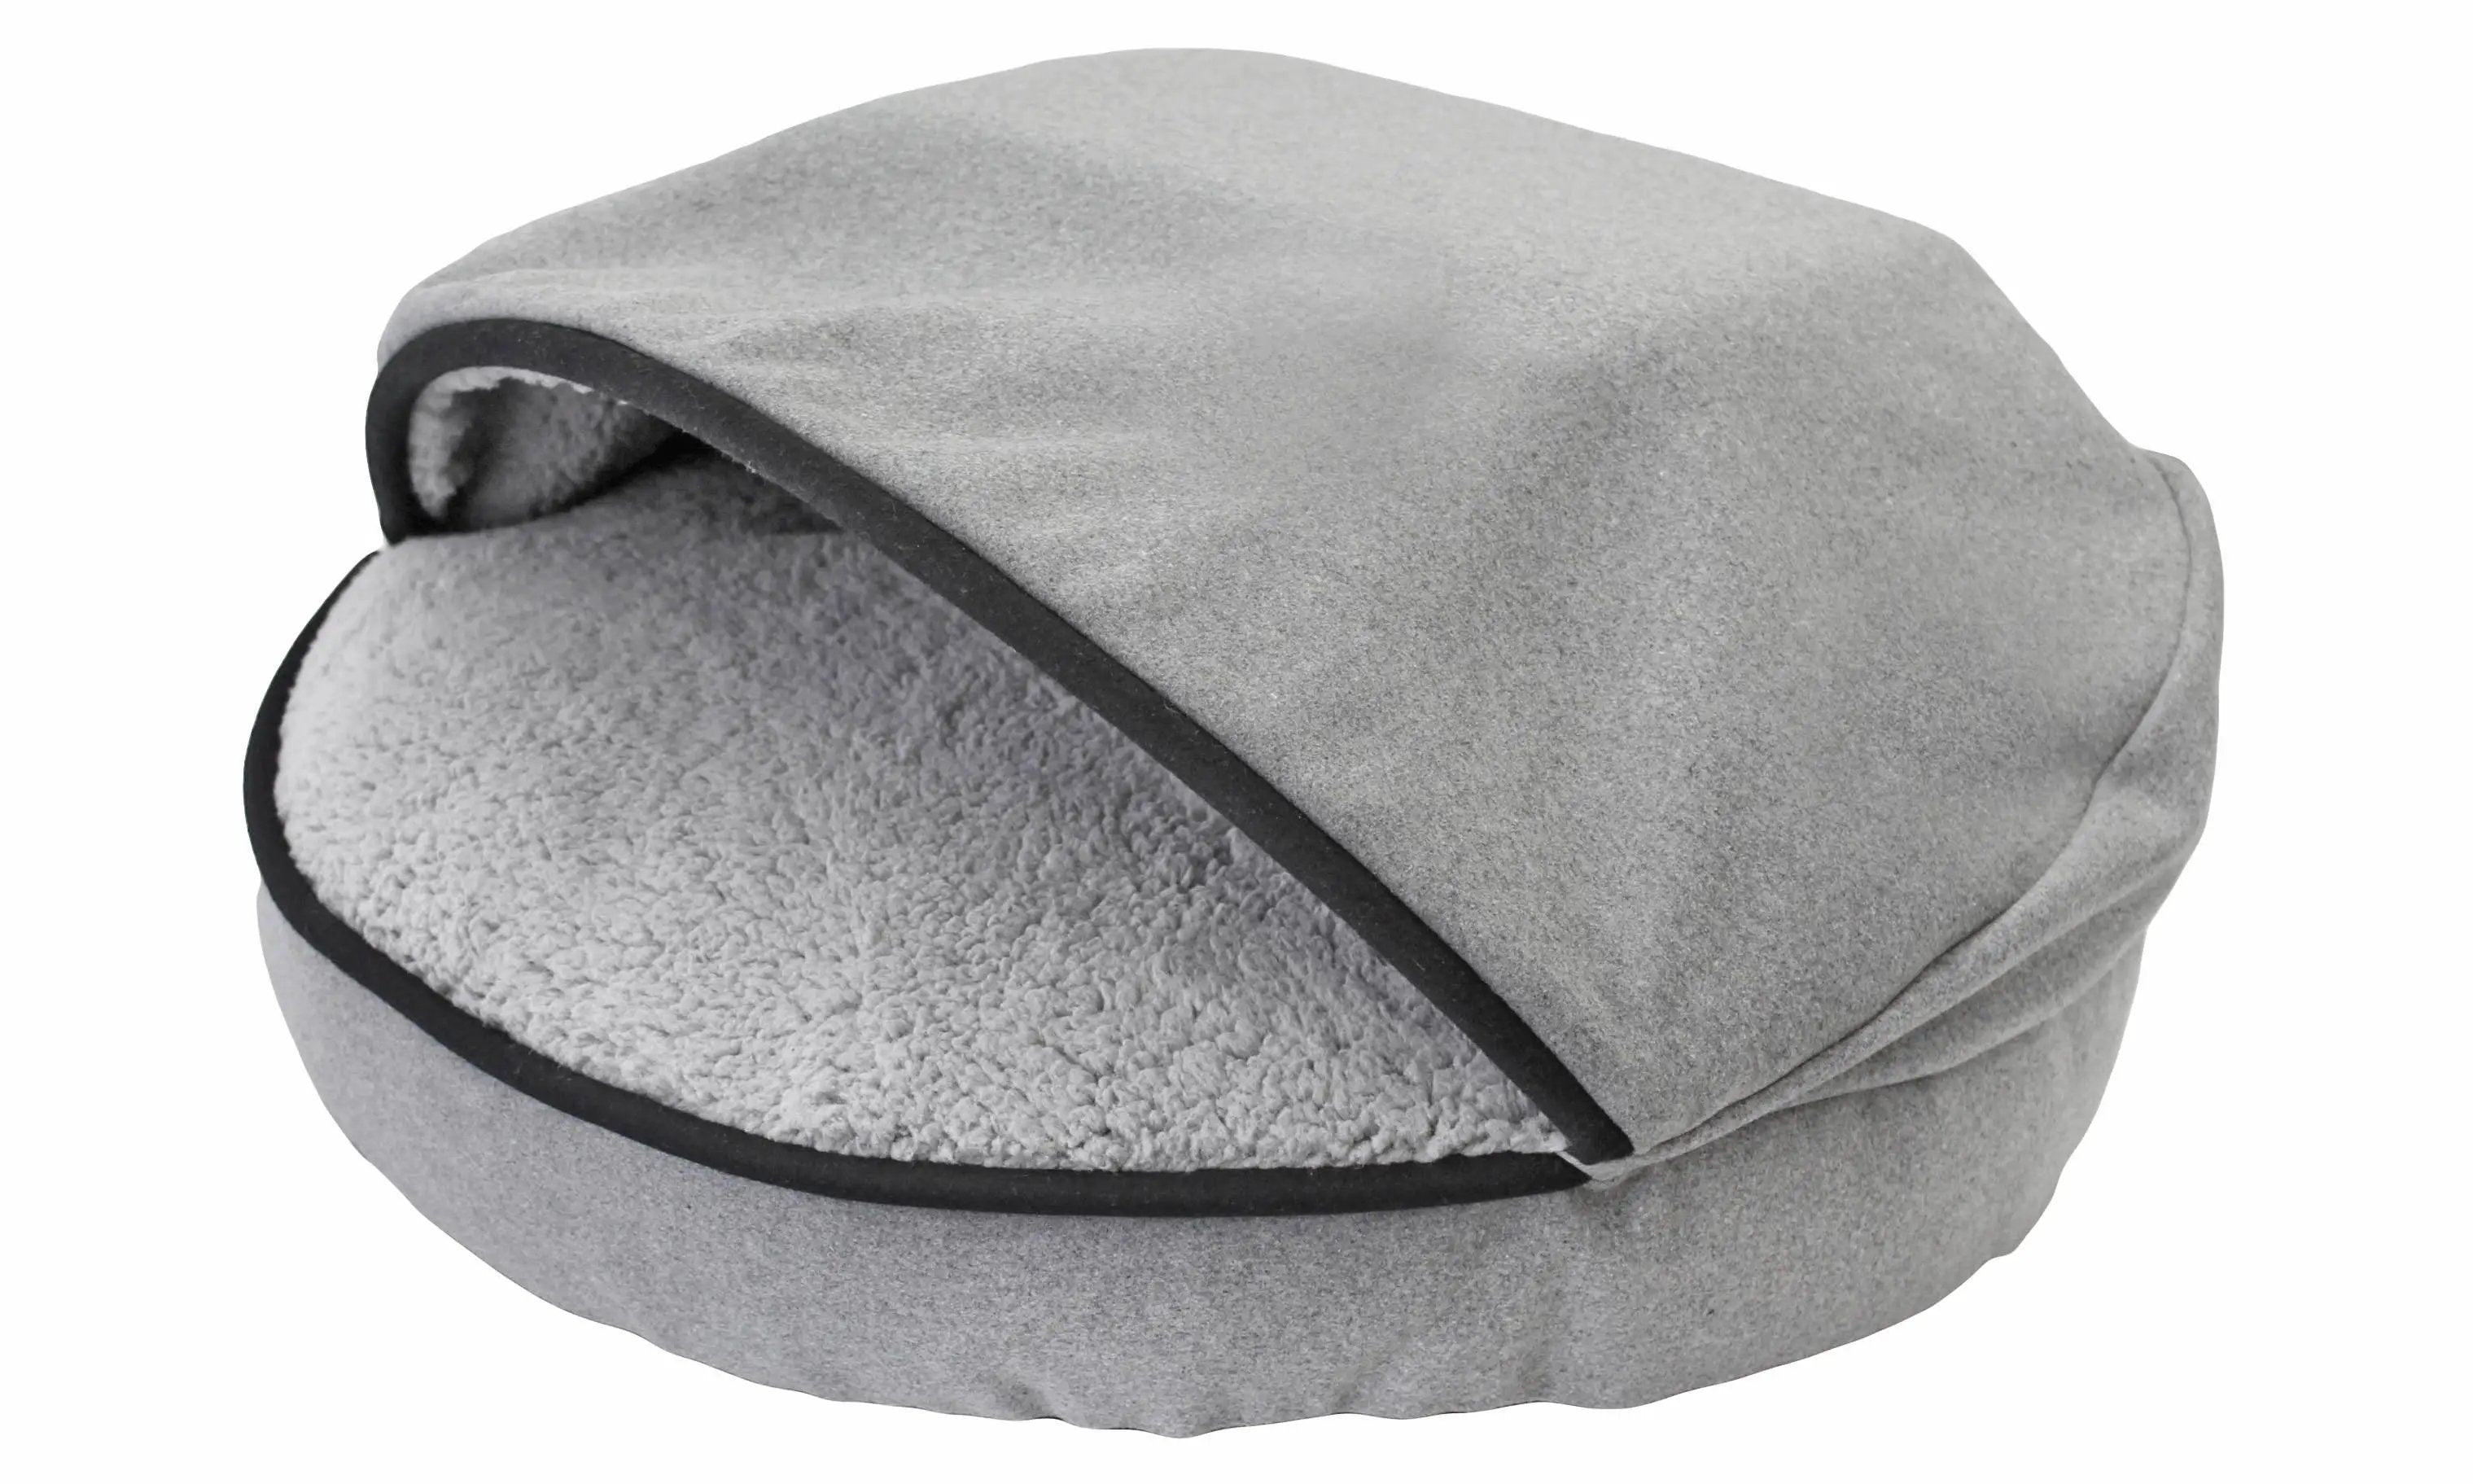 Precious Tails Precious Tails Plush Felt Sherpa Lined Cave Hooded Pet Bed